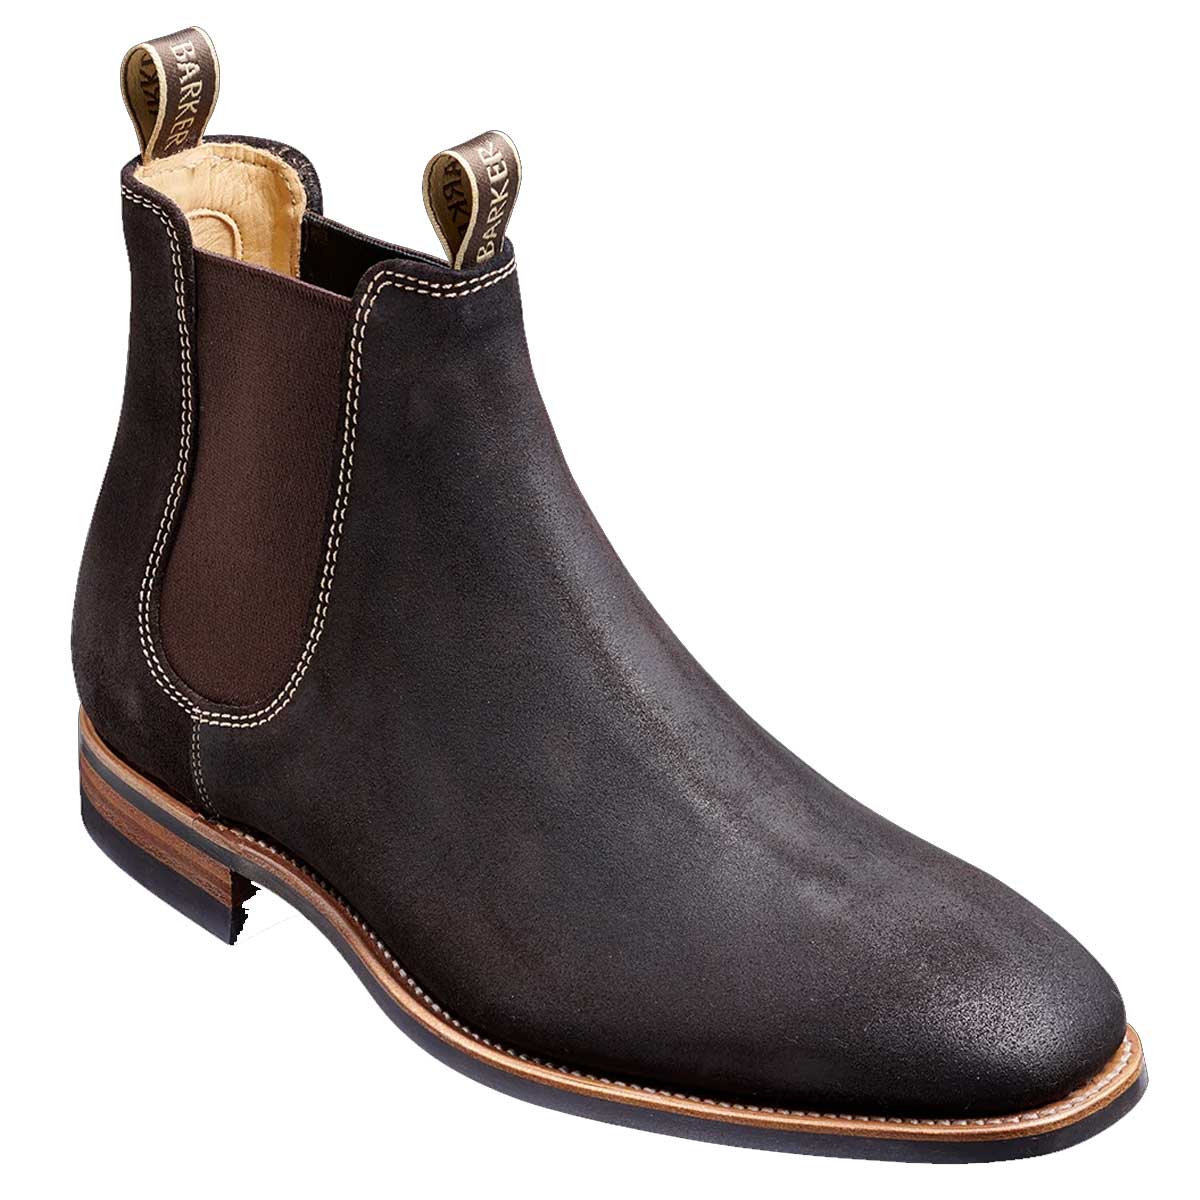 BARKER Mansfield Chelsea Boots - Mens - Choc Burnish Suede